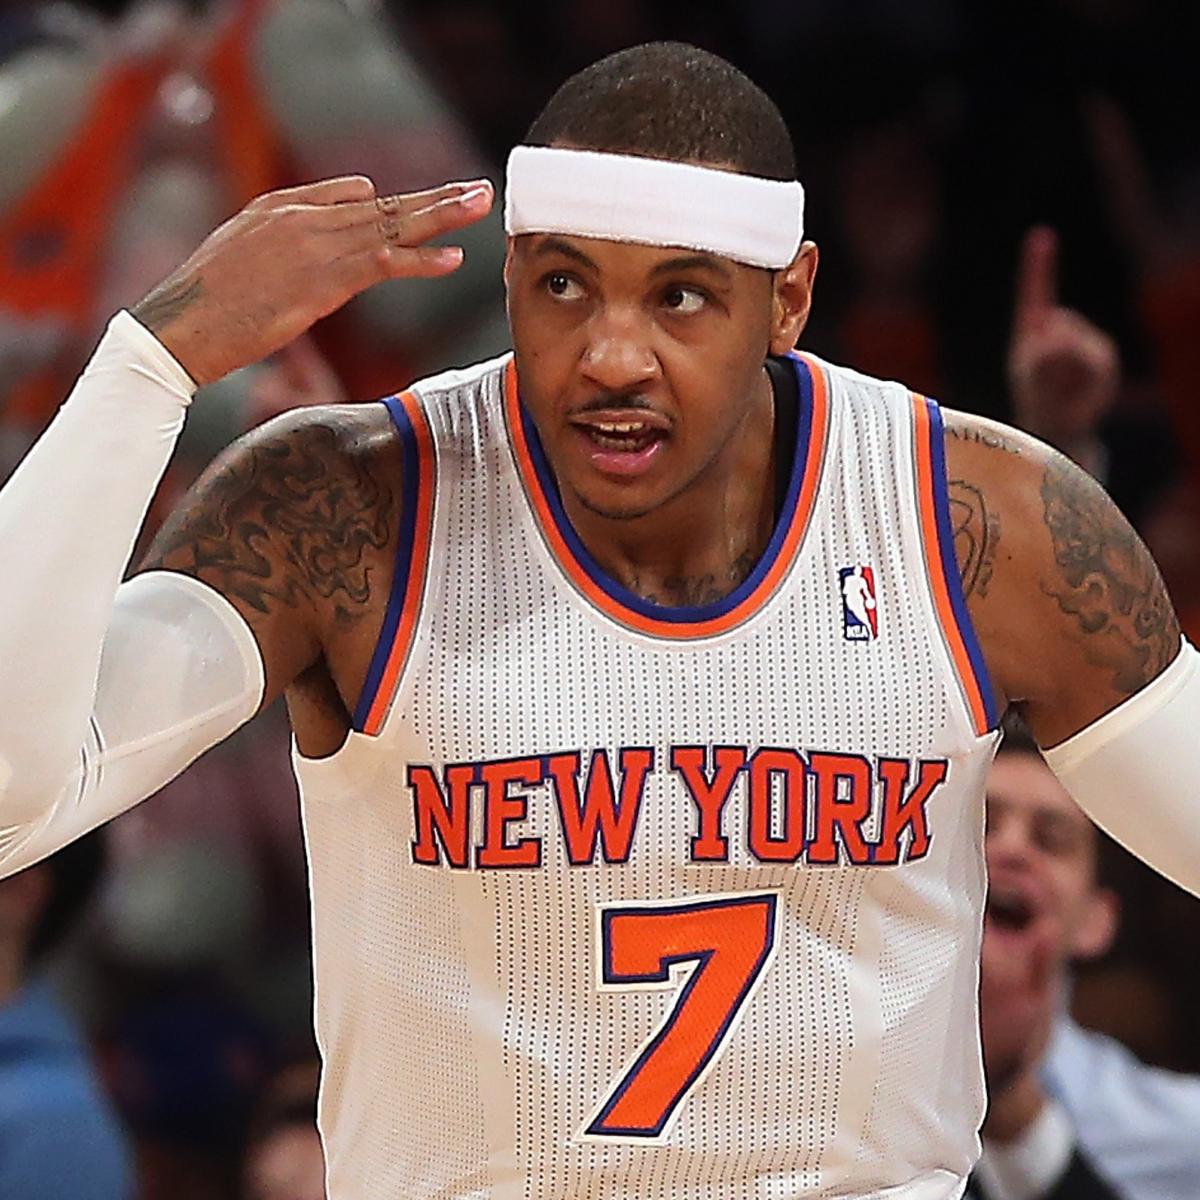 NBA Playoffs Possible FirstRound Matchups for the New York Knicks